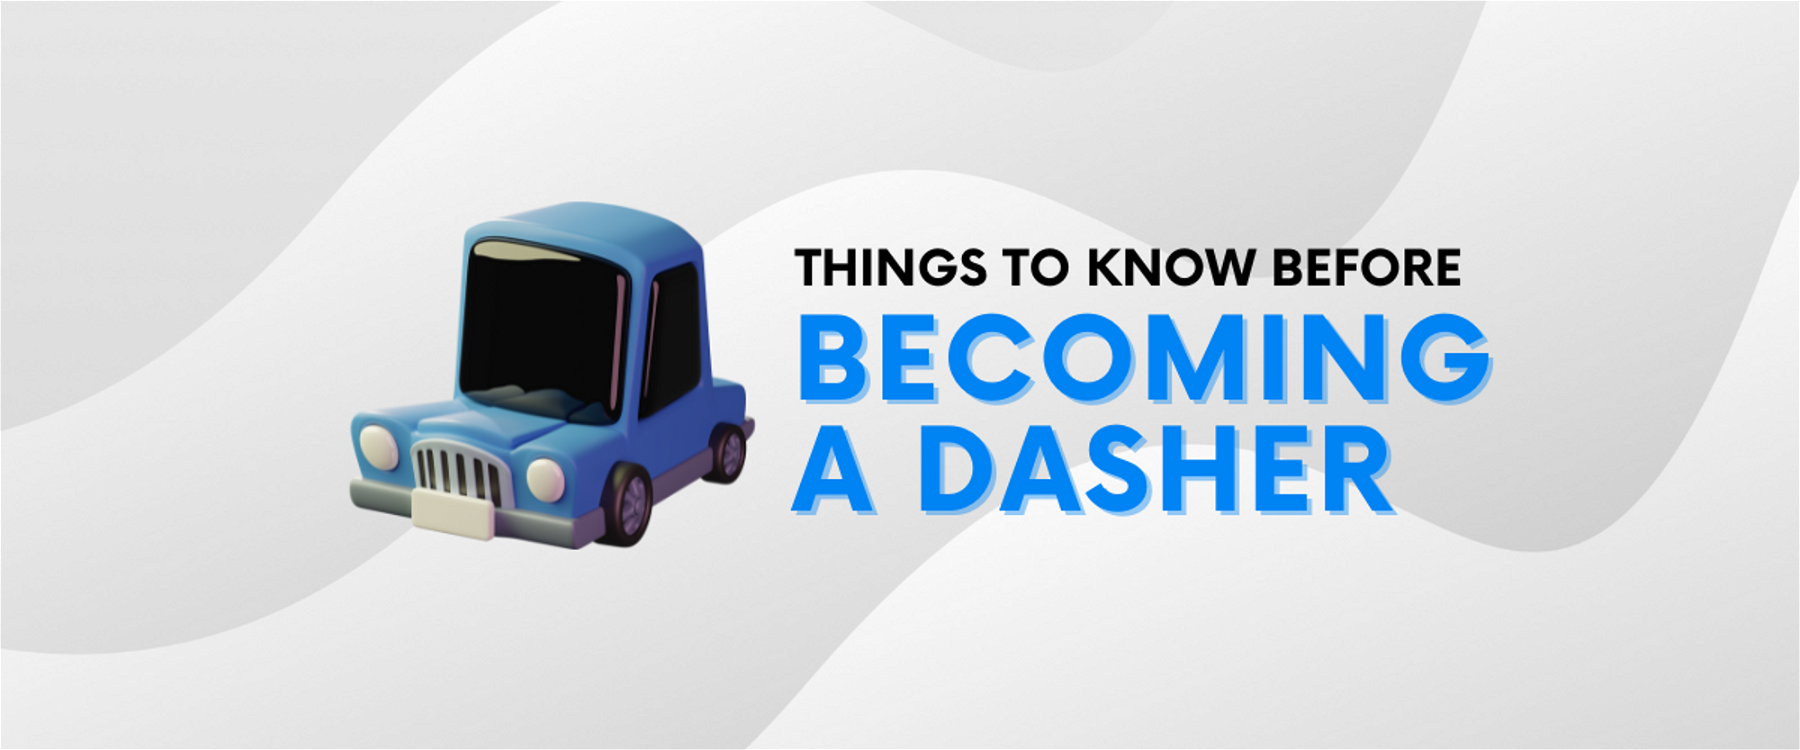 Things To Know Before Becoming A Dasher